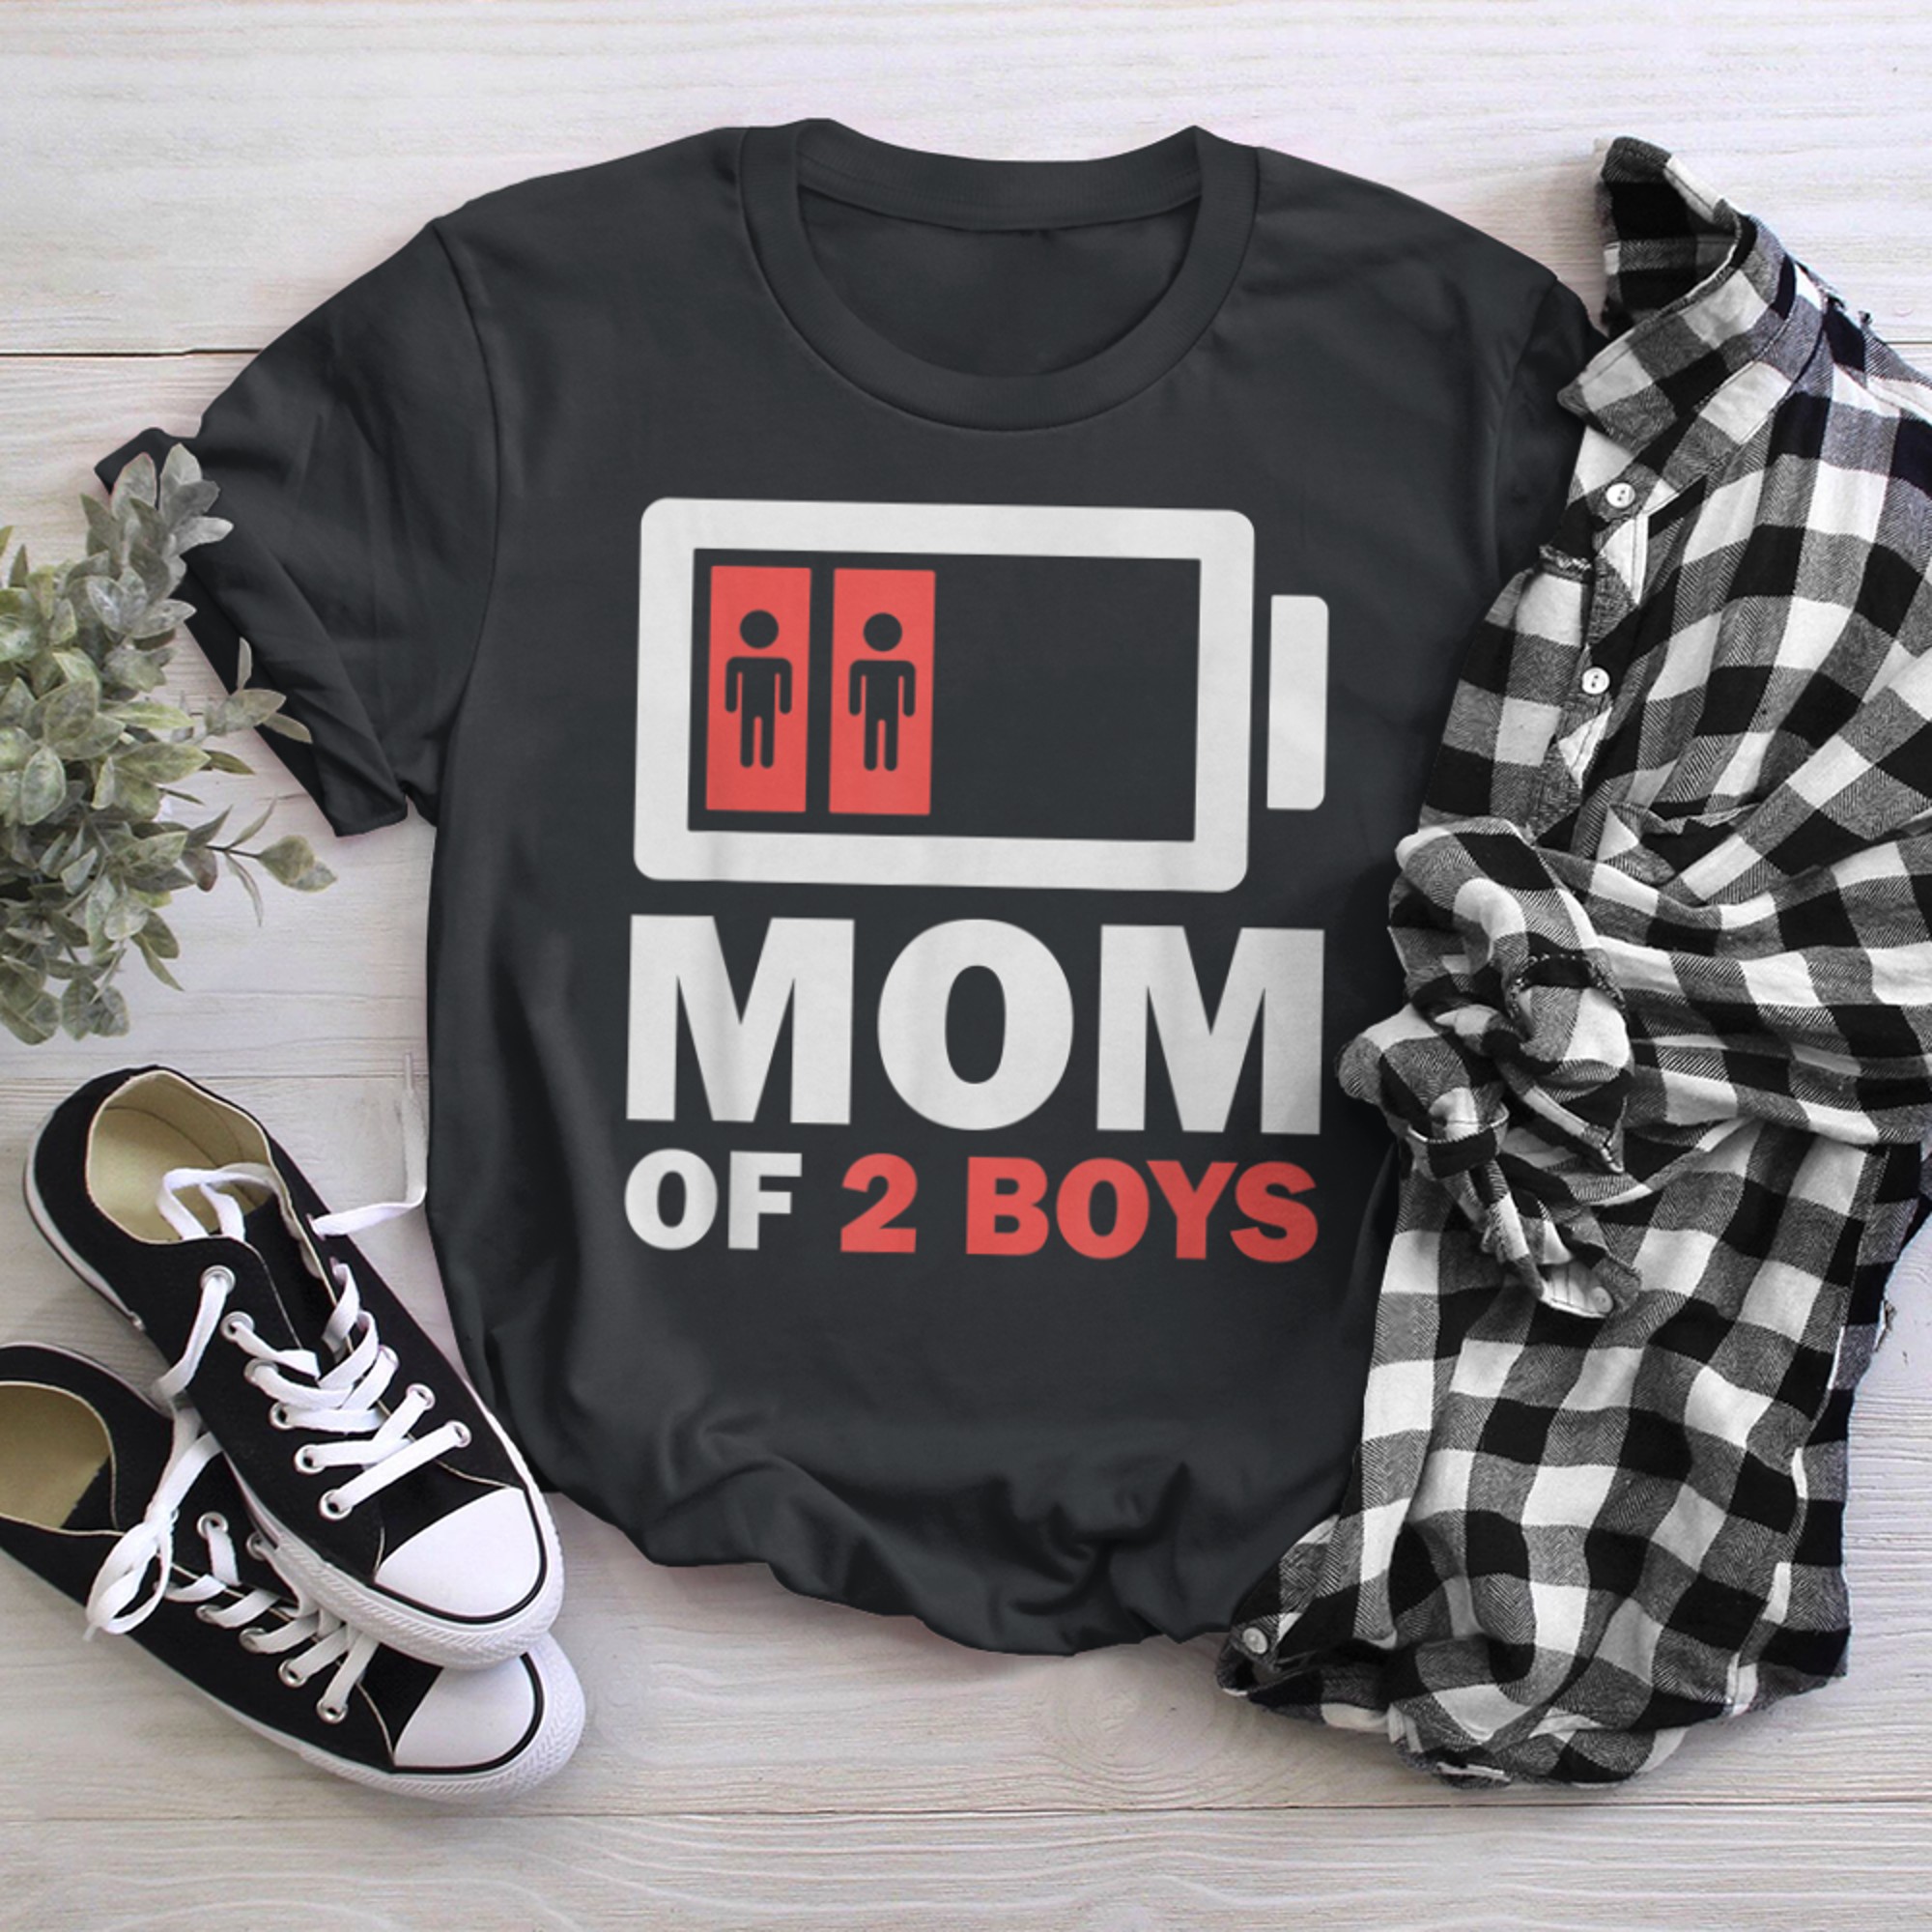 MOM OF from Son Mothers Day Birthday (12) t-shirt black